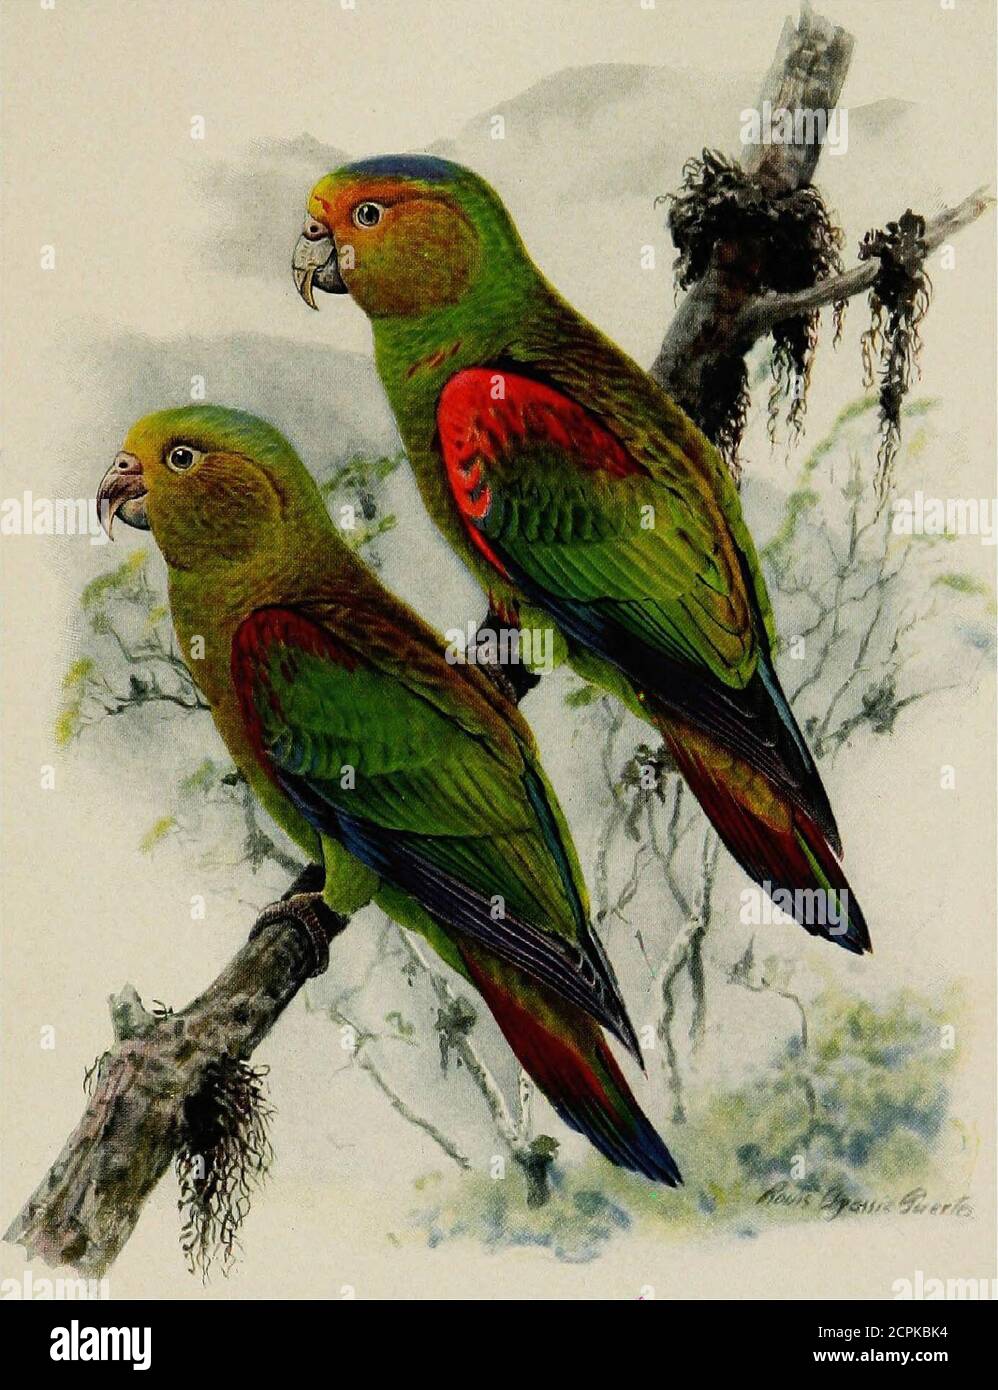 . The distribution of bird-life in Colombia; a contribution to a biological survey of South America . Pionopsitta fuertesi Chapm., Bull. A. M. N. H., XXXI, 1912, p. 143 (Laguneta,10,300 ft., Cen. Andes, Col.). Char. sp.â Most nearly related to H. amazonina (Des Murs) but face yellow,crown blue. This distinct and interesting species was found by us only in the Tem-perate Zone of the Central Andes. Like amazonina, fuertesi has the maxil-lary tomium unnotched, while the tail is even longer than in that species. Laguneta, 6; Santa Isabel, 1. (876) Eucinetus pulchra (Berl.). Pionopsitta pulchra Ber Stock Photo